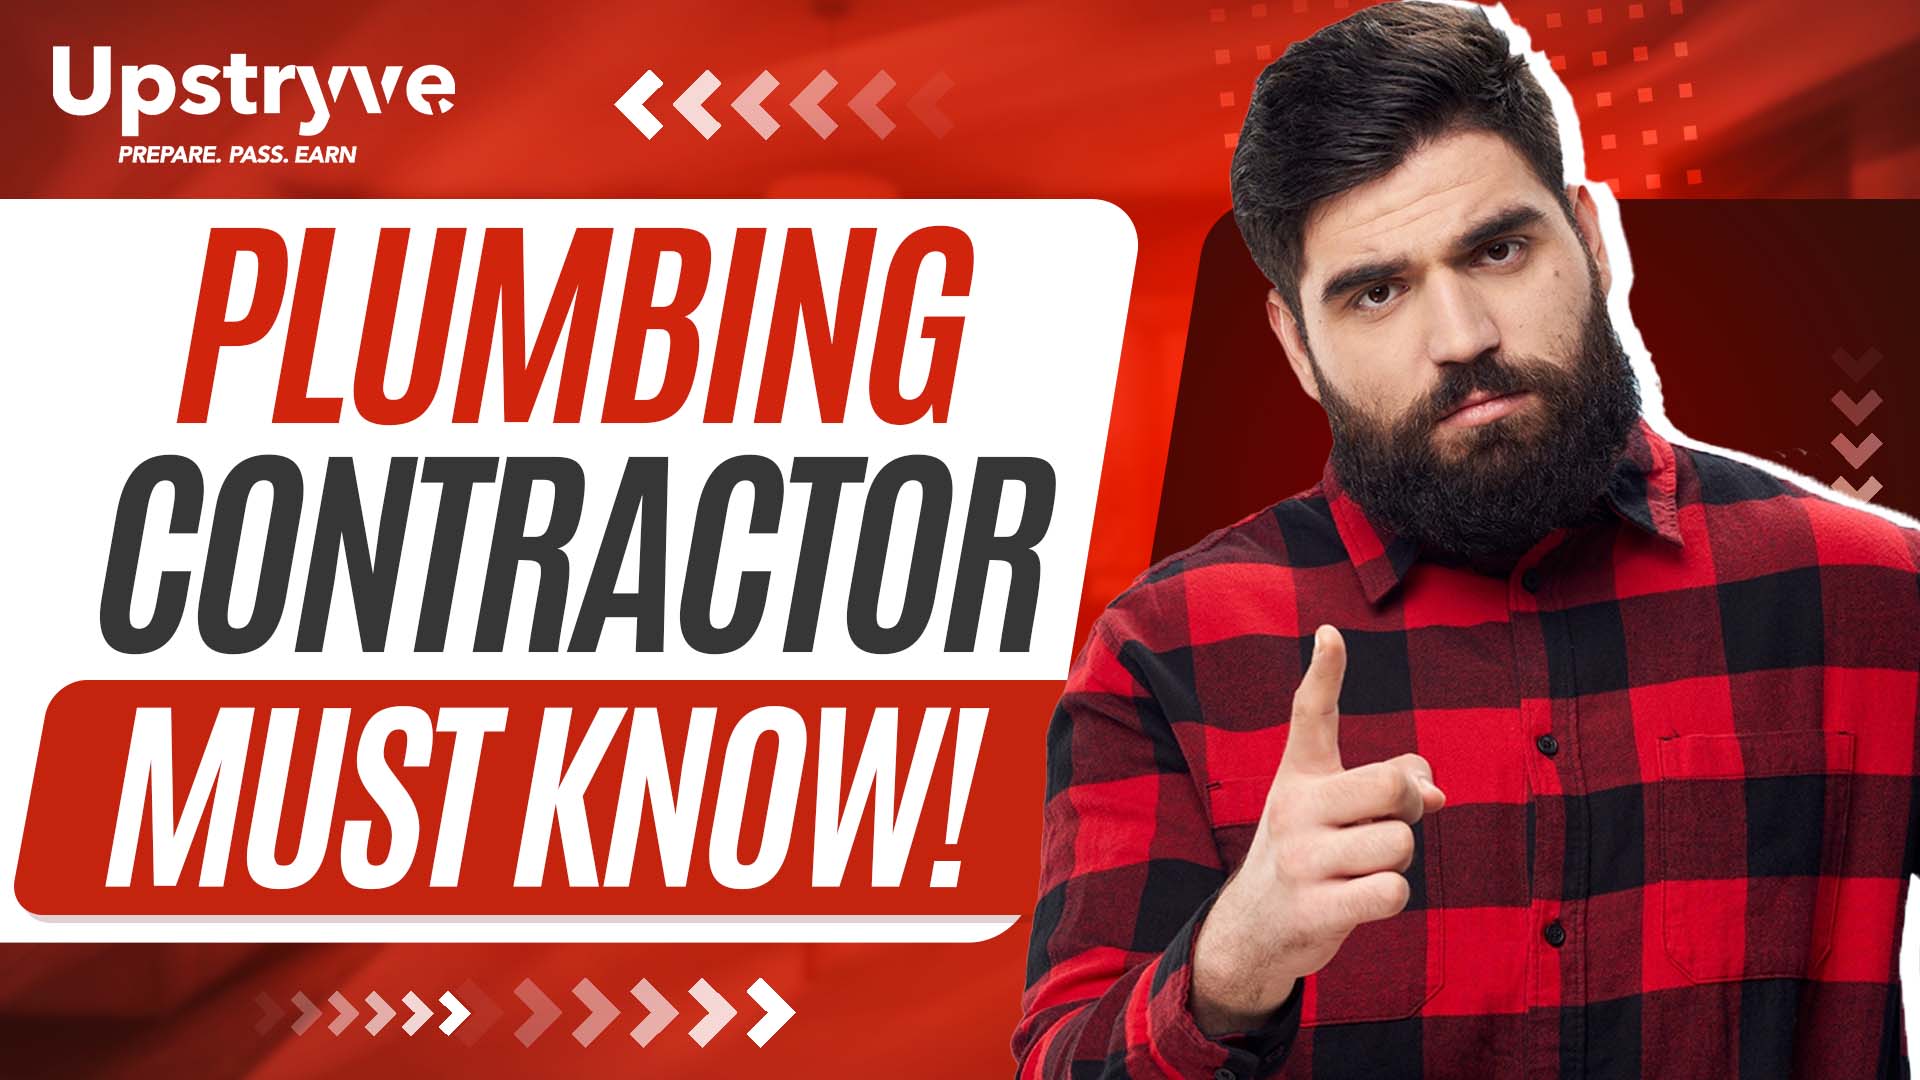 Thomas Hicken has over a decade of plumbing experience. In today's video he will go over how to become a plumbing contractor. These tips are coming from someone who is a master plumber, plumbing contractor, plumbing instructor and plumbing mentor. If becoming a plumbing contractor is your goal then this video will help you get on the right path to success.